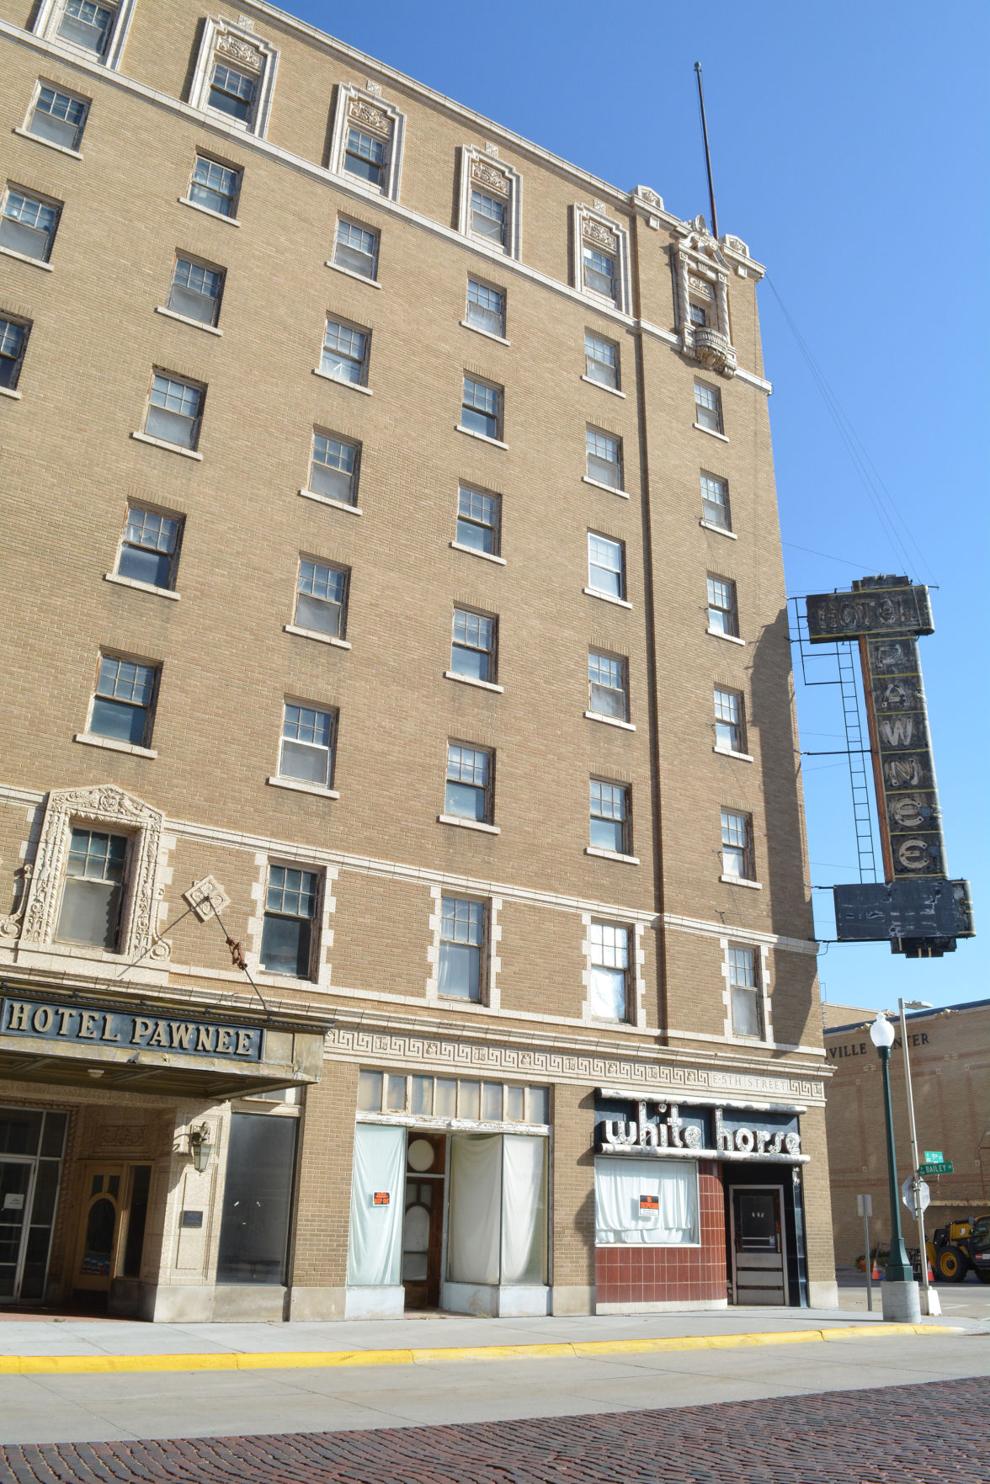 Real estate deal closes for Hotel Pawnee, clearing the way for ...